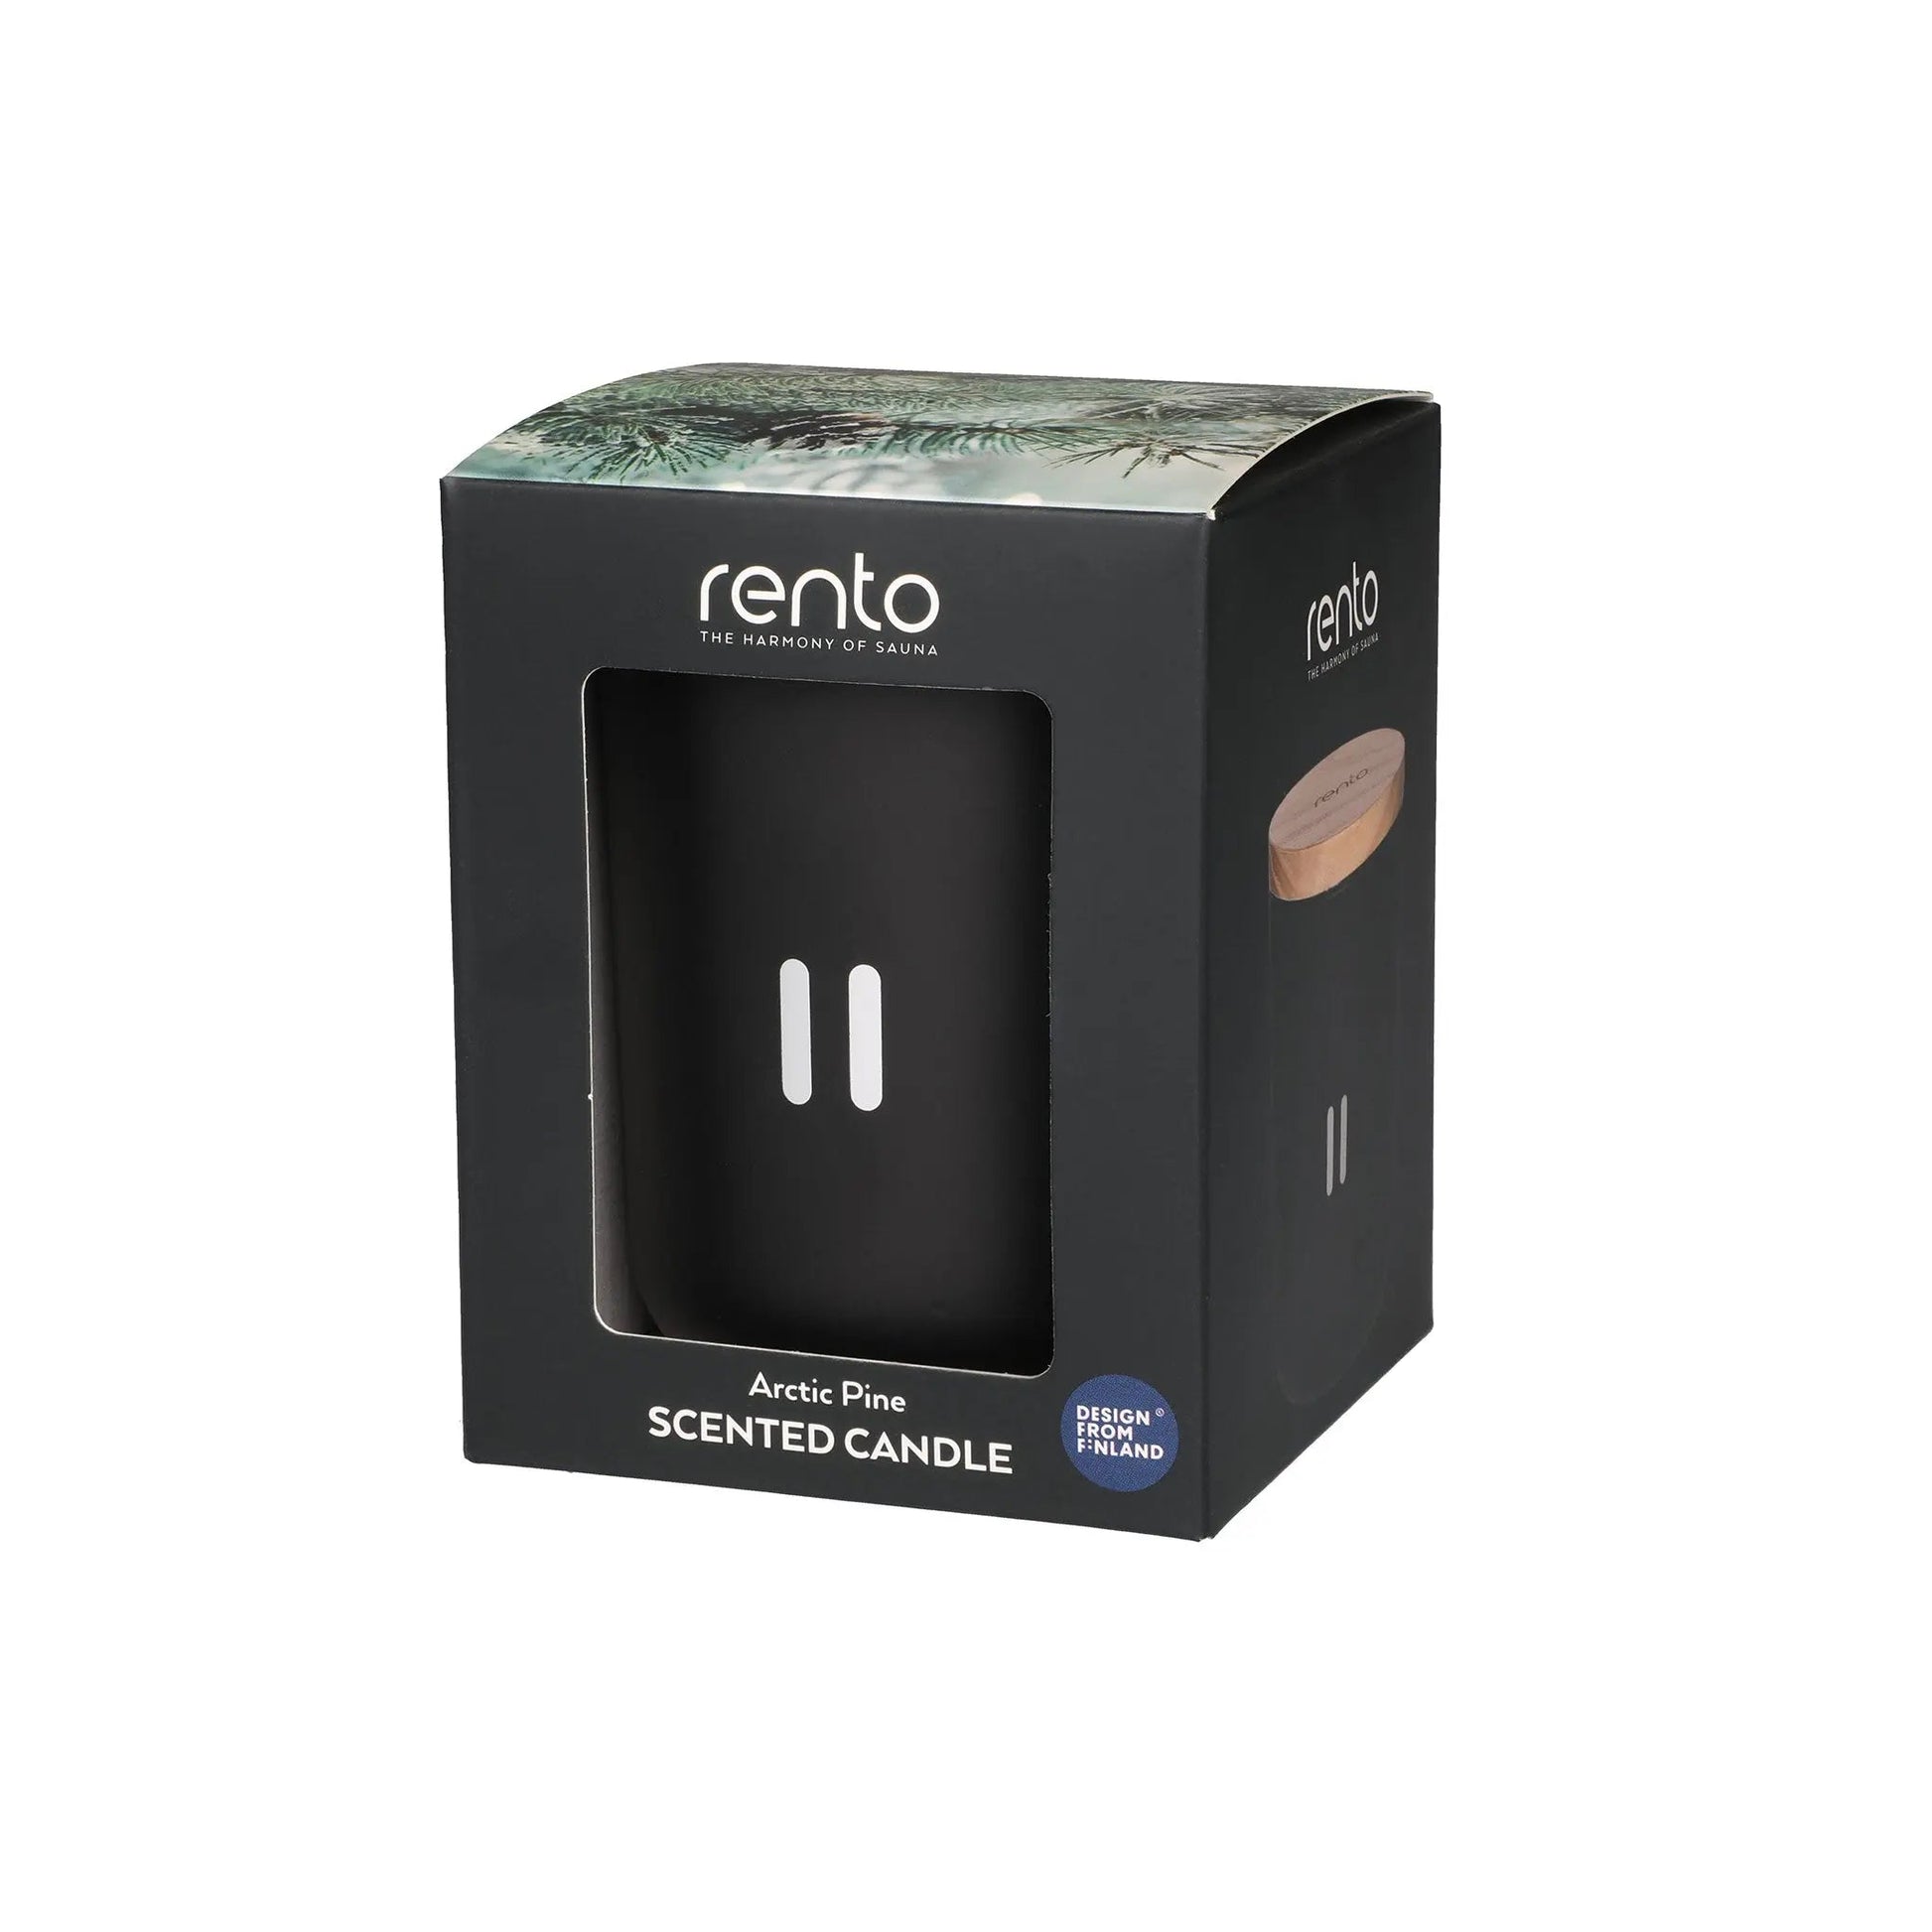 Rento Arctic Pine Scented Candle Scented Candle | Finnmark Sauna